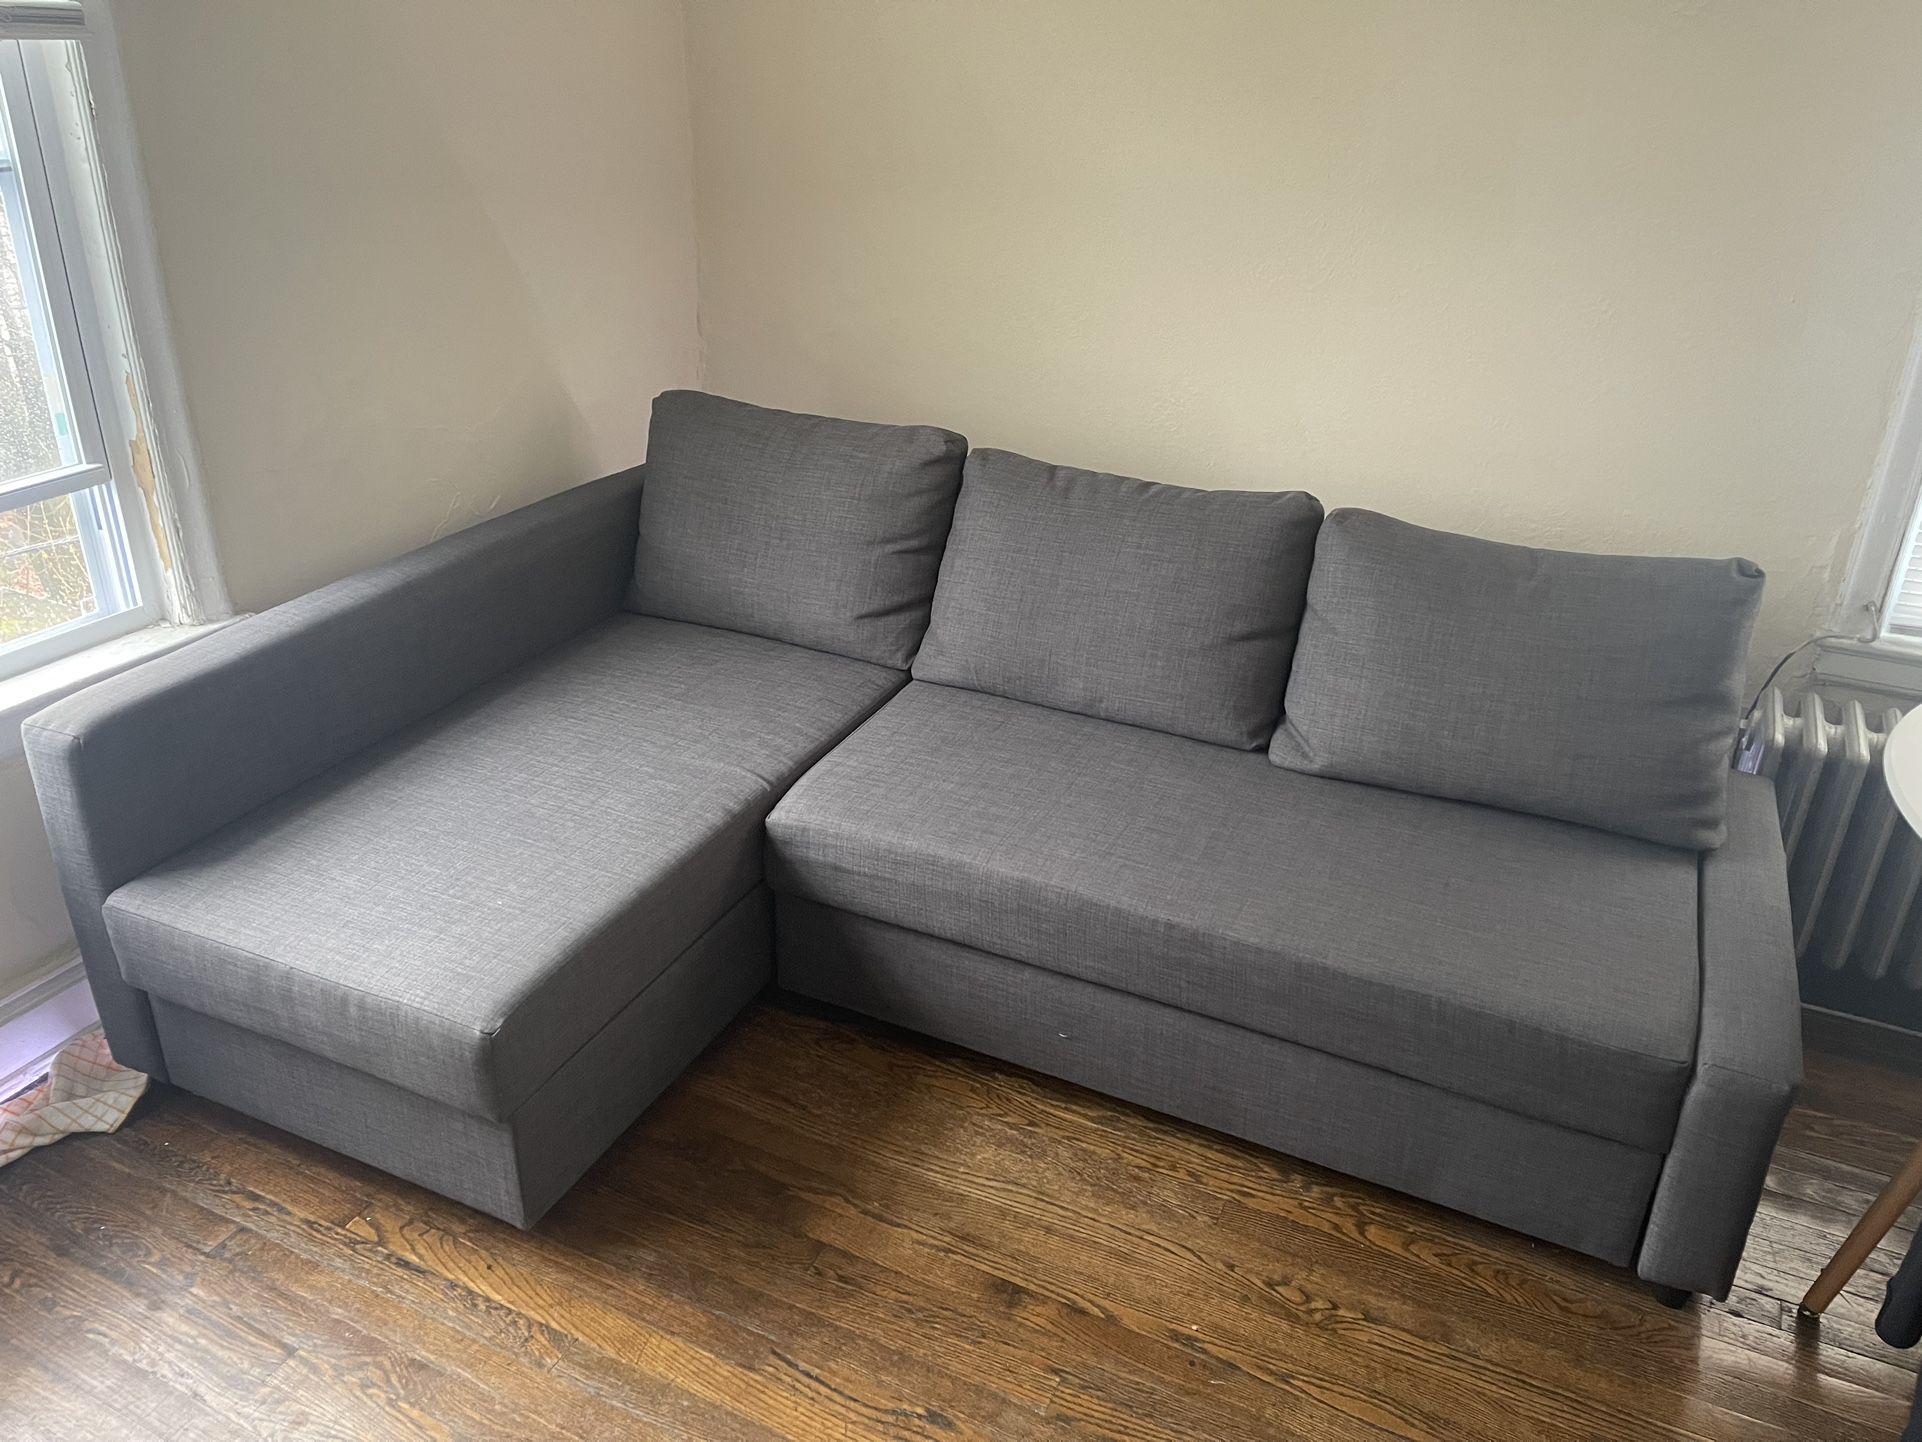 Sleeper Sectional Sofa, 3 Seat With Storage - Gray